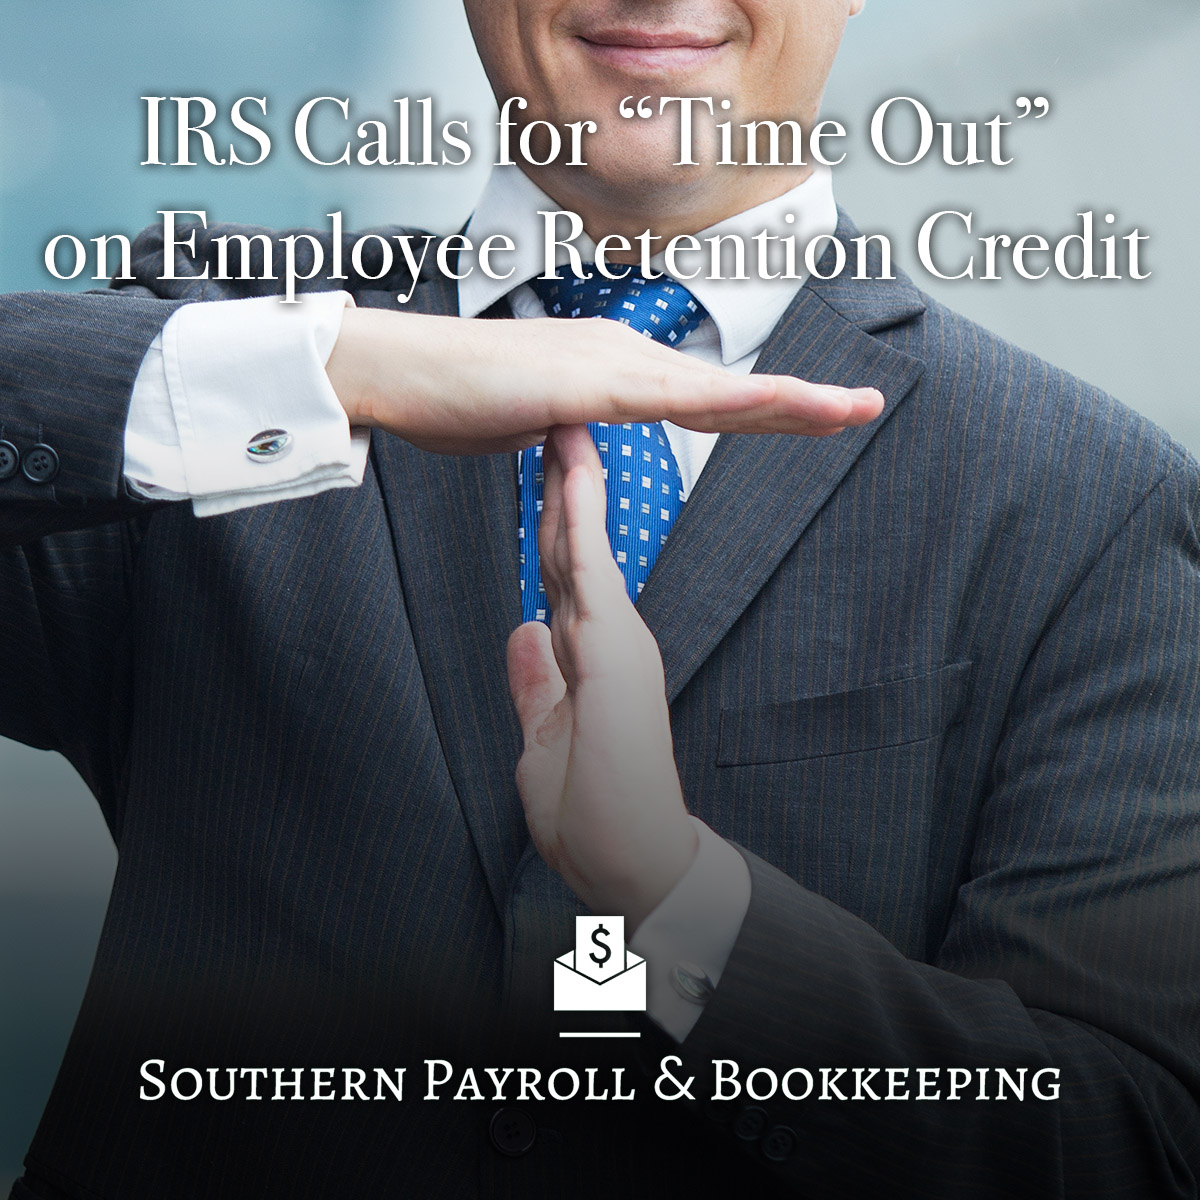 IRS Calls For a Time Out on Employee Retention Credit